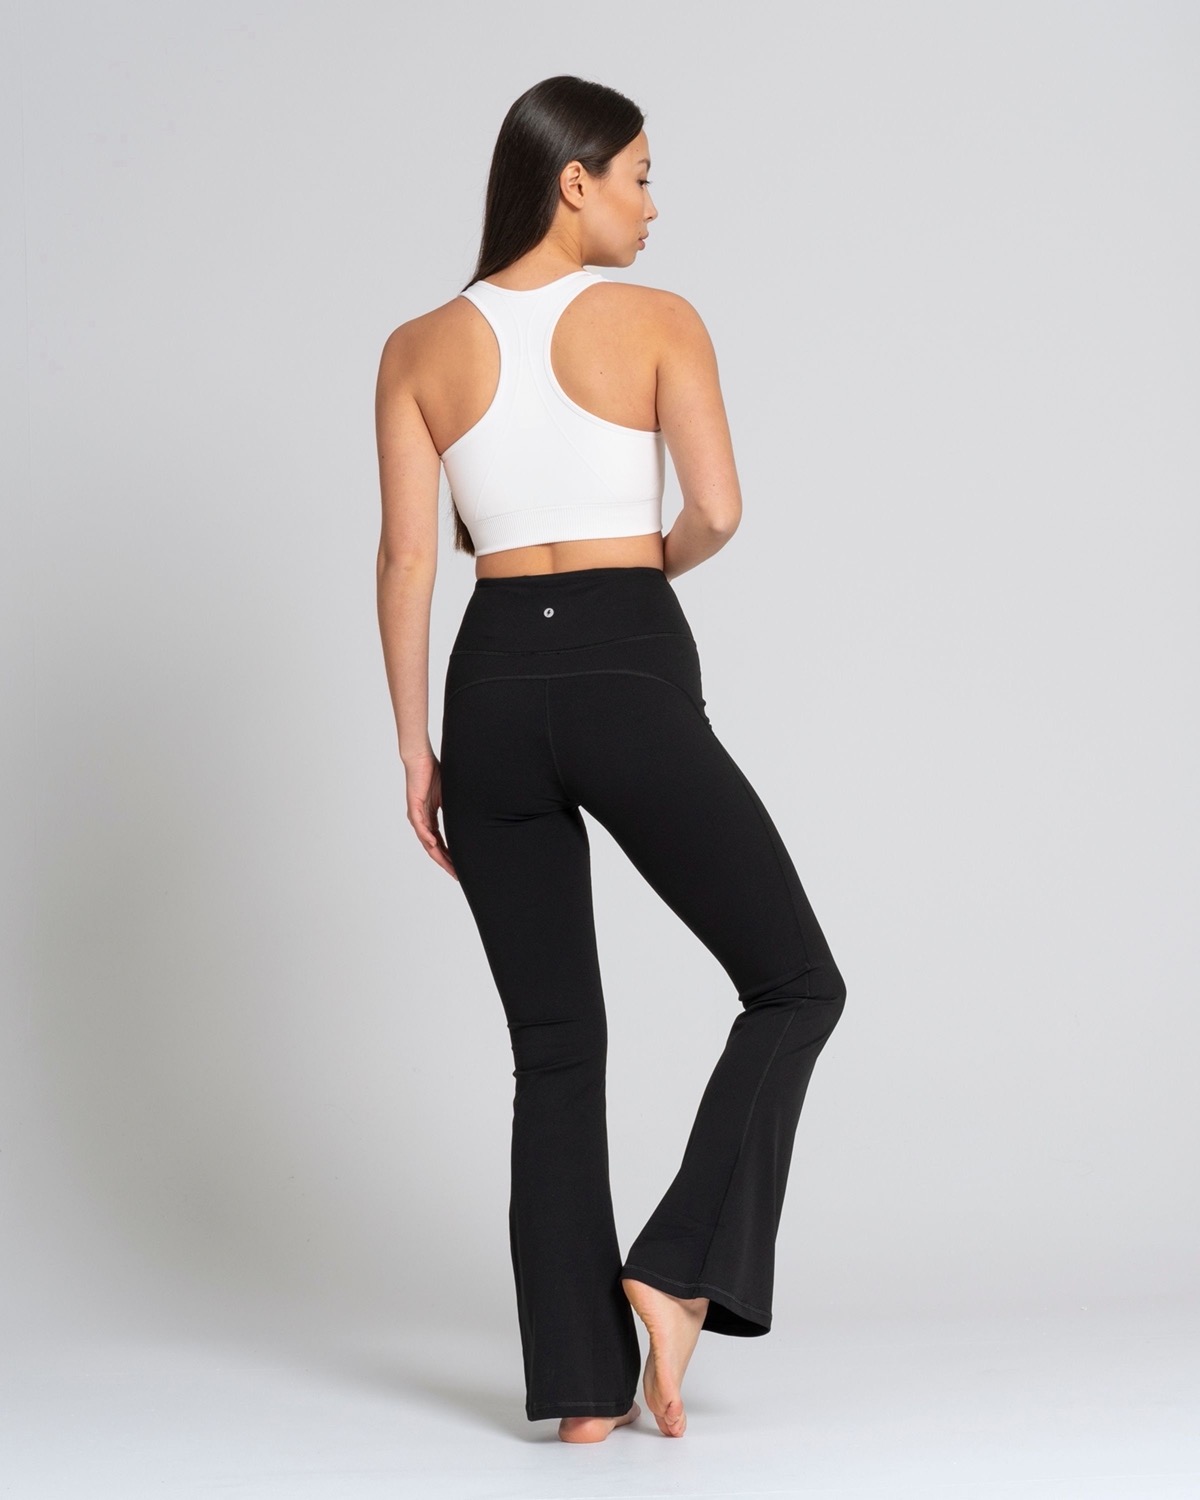 Dunnes Stores fans set for frenzy over black flared leggings on sale for  €20 - they're a wardrobe staple